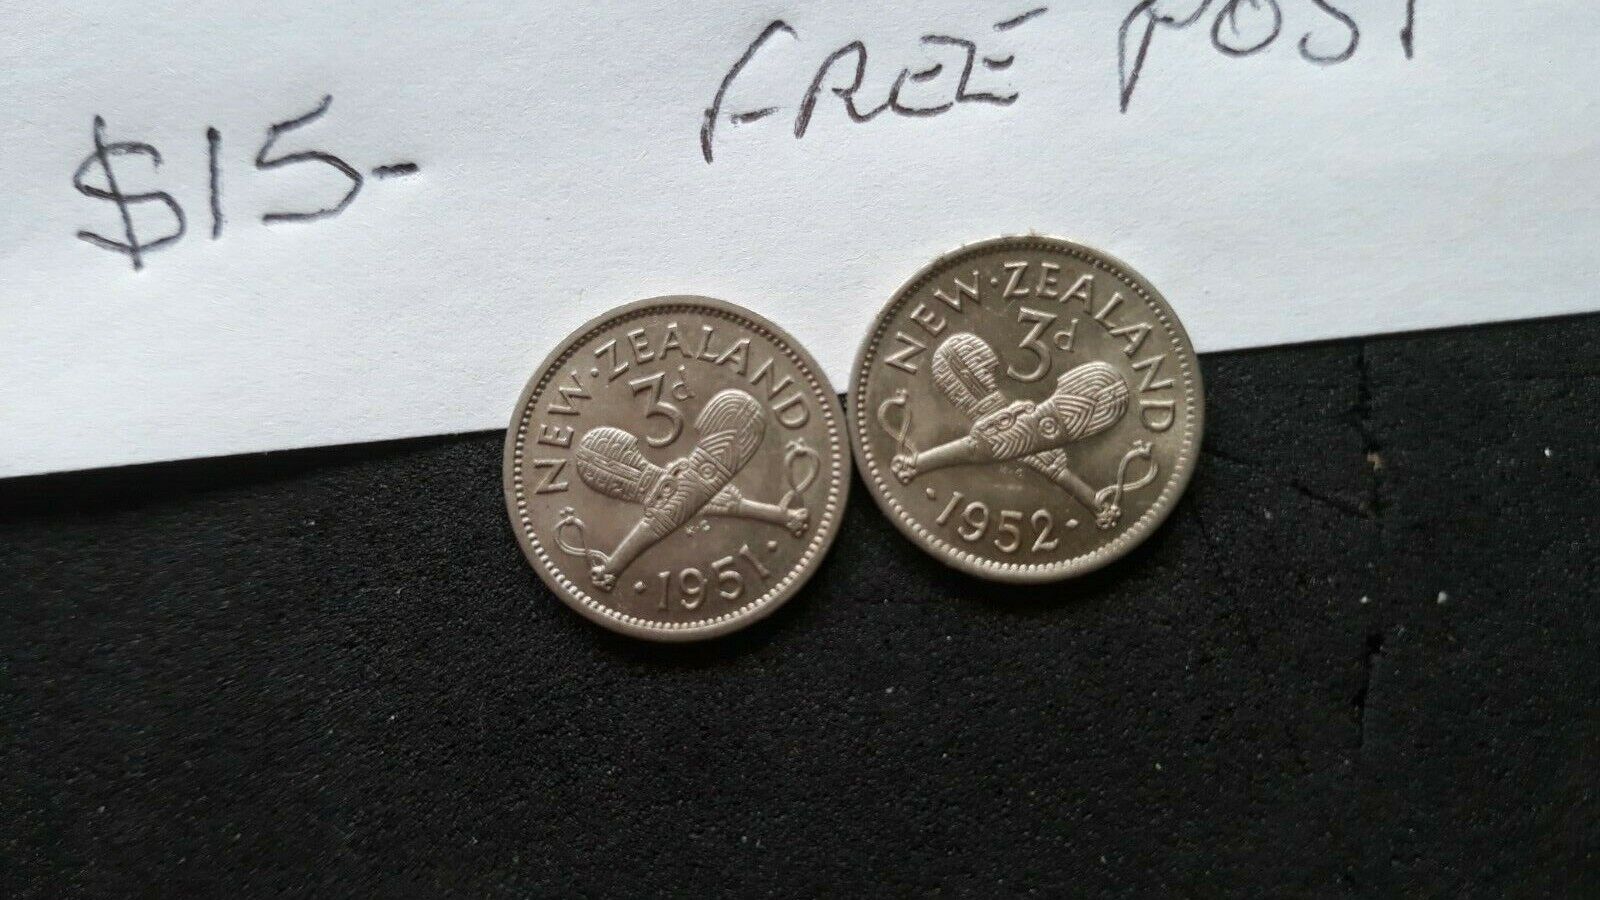 new Zealand coins 3ds see photos x2 1947 1948 $15 post $3  Без бренда